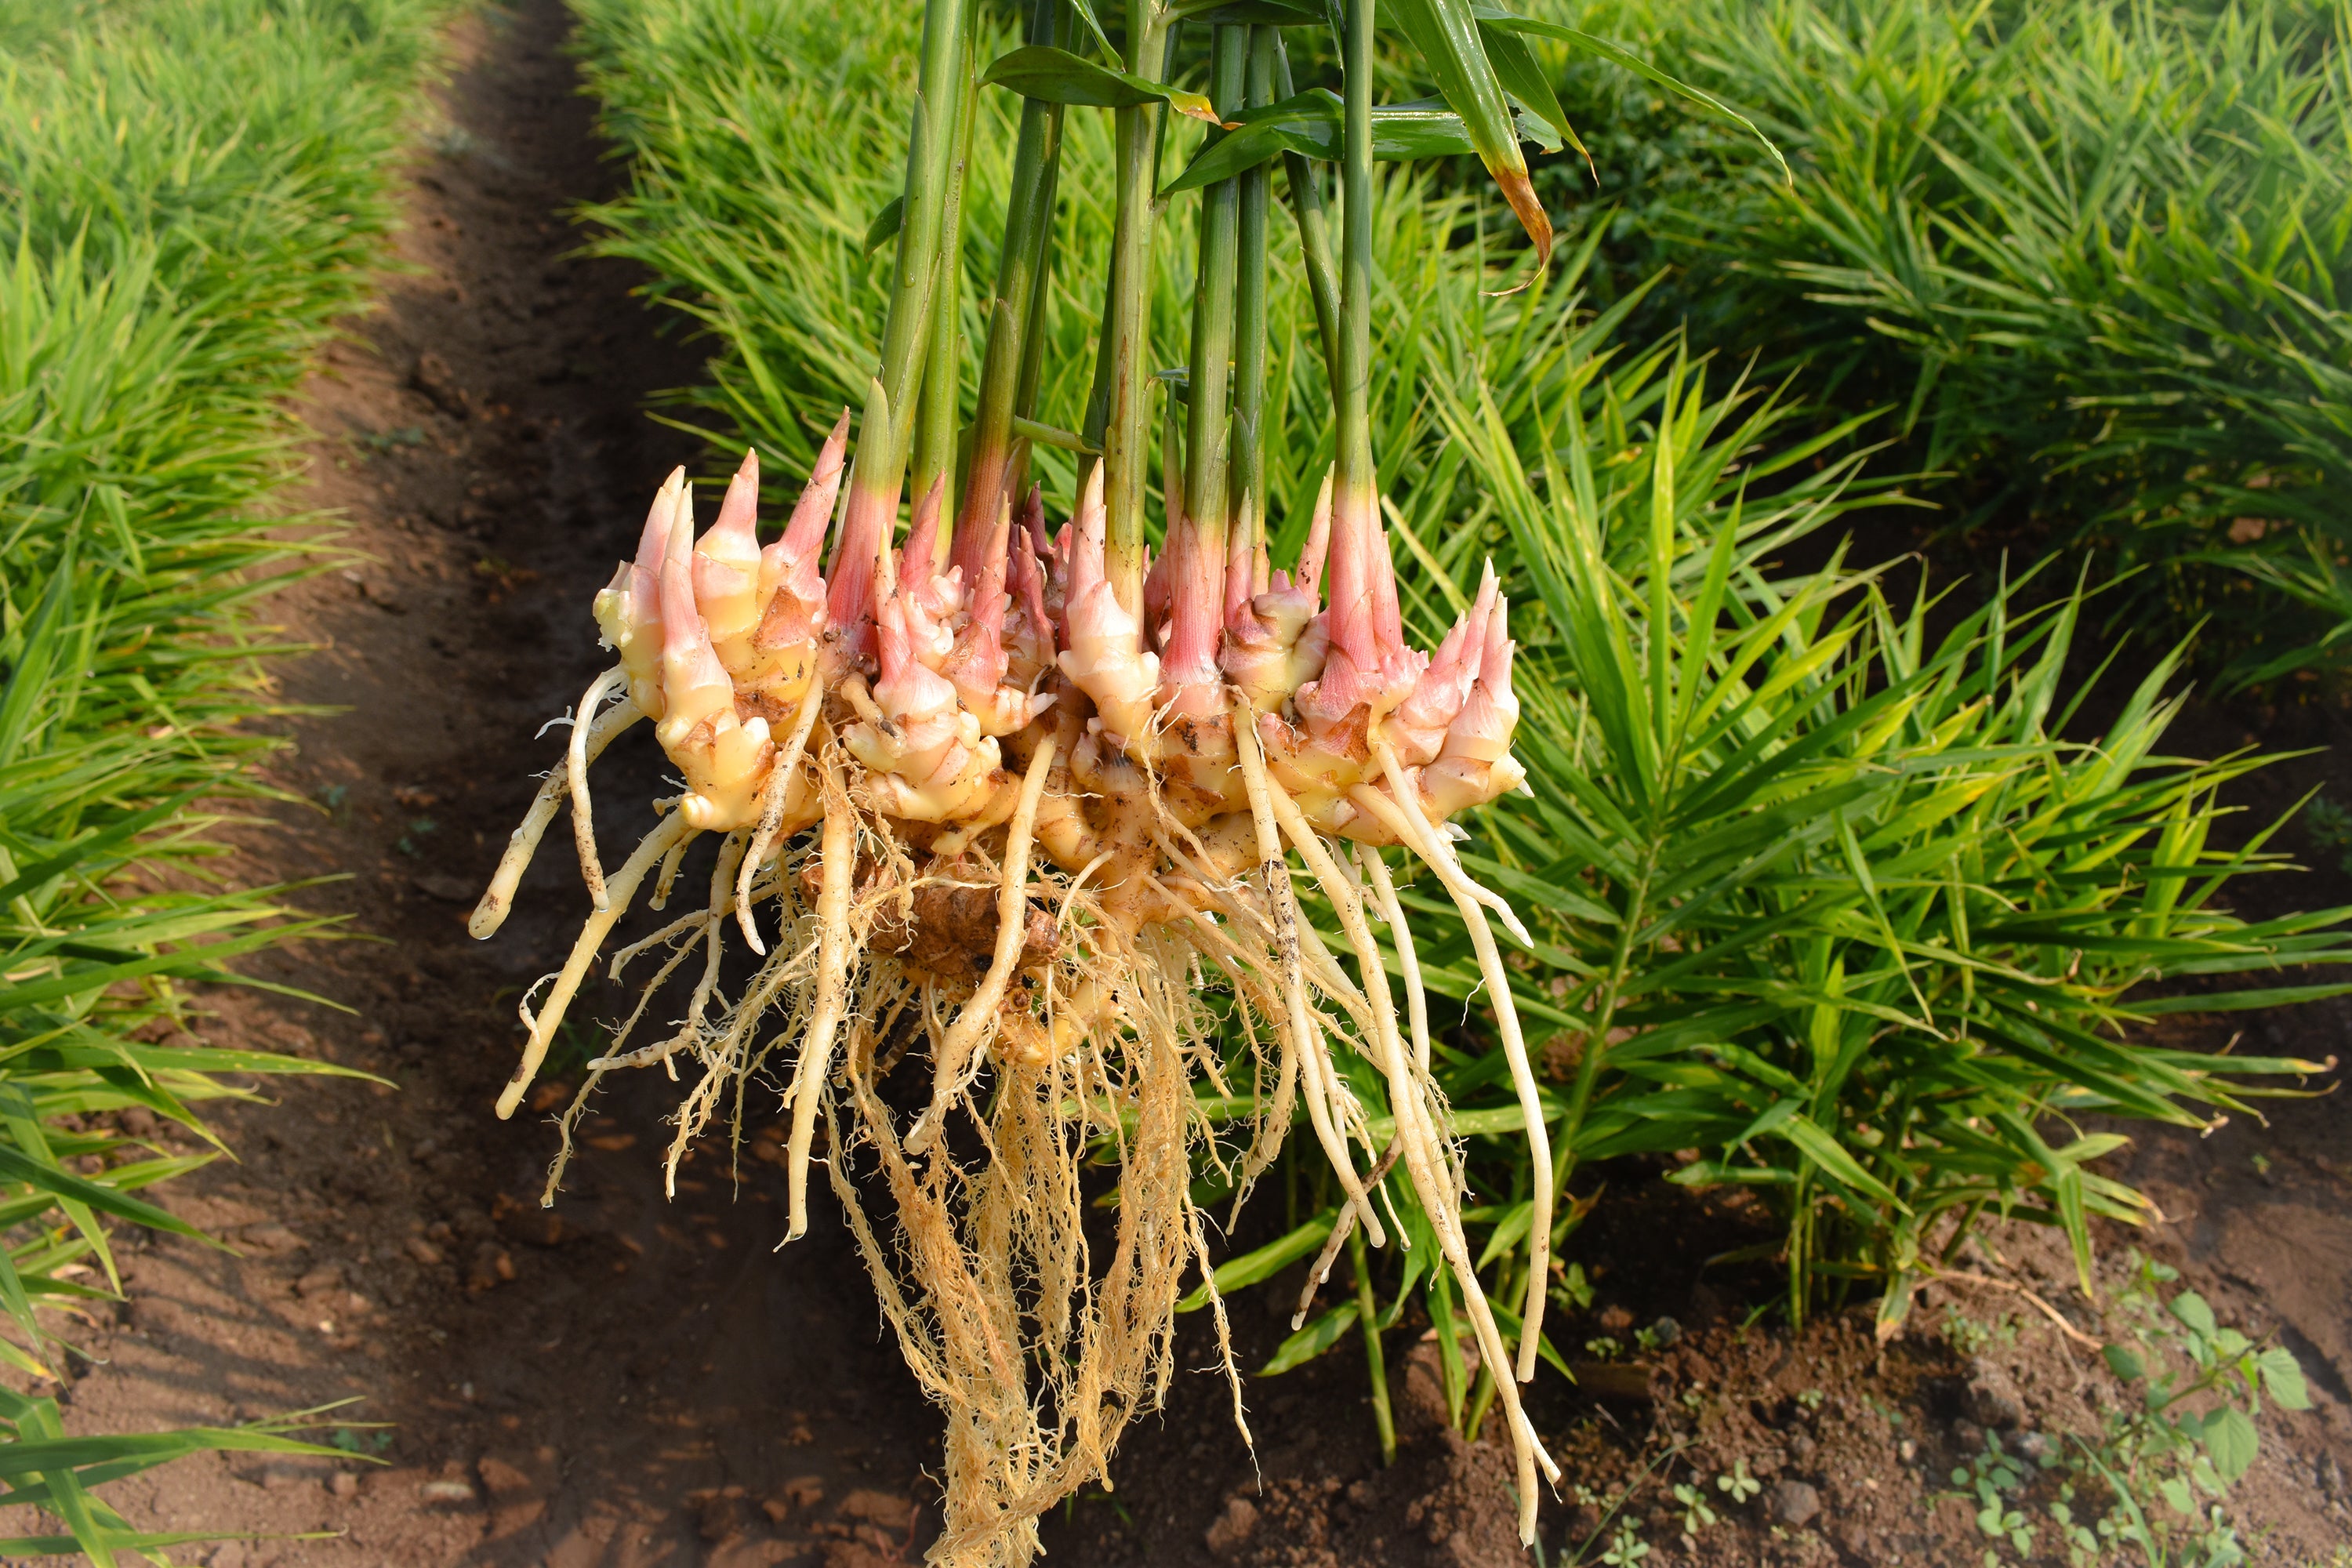 Ginger plant used in Kekoa Foods organic baby pouches.